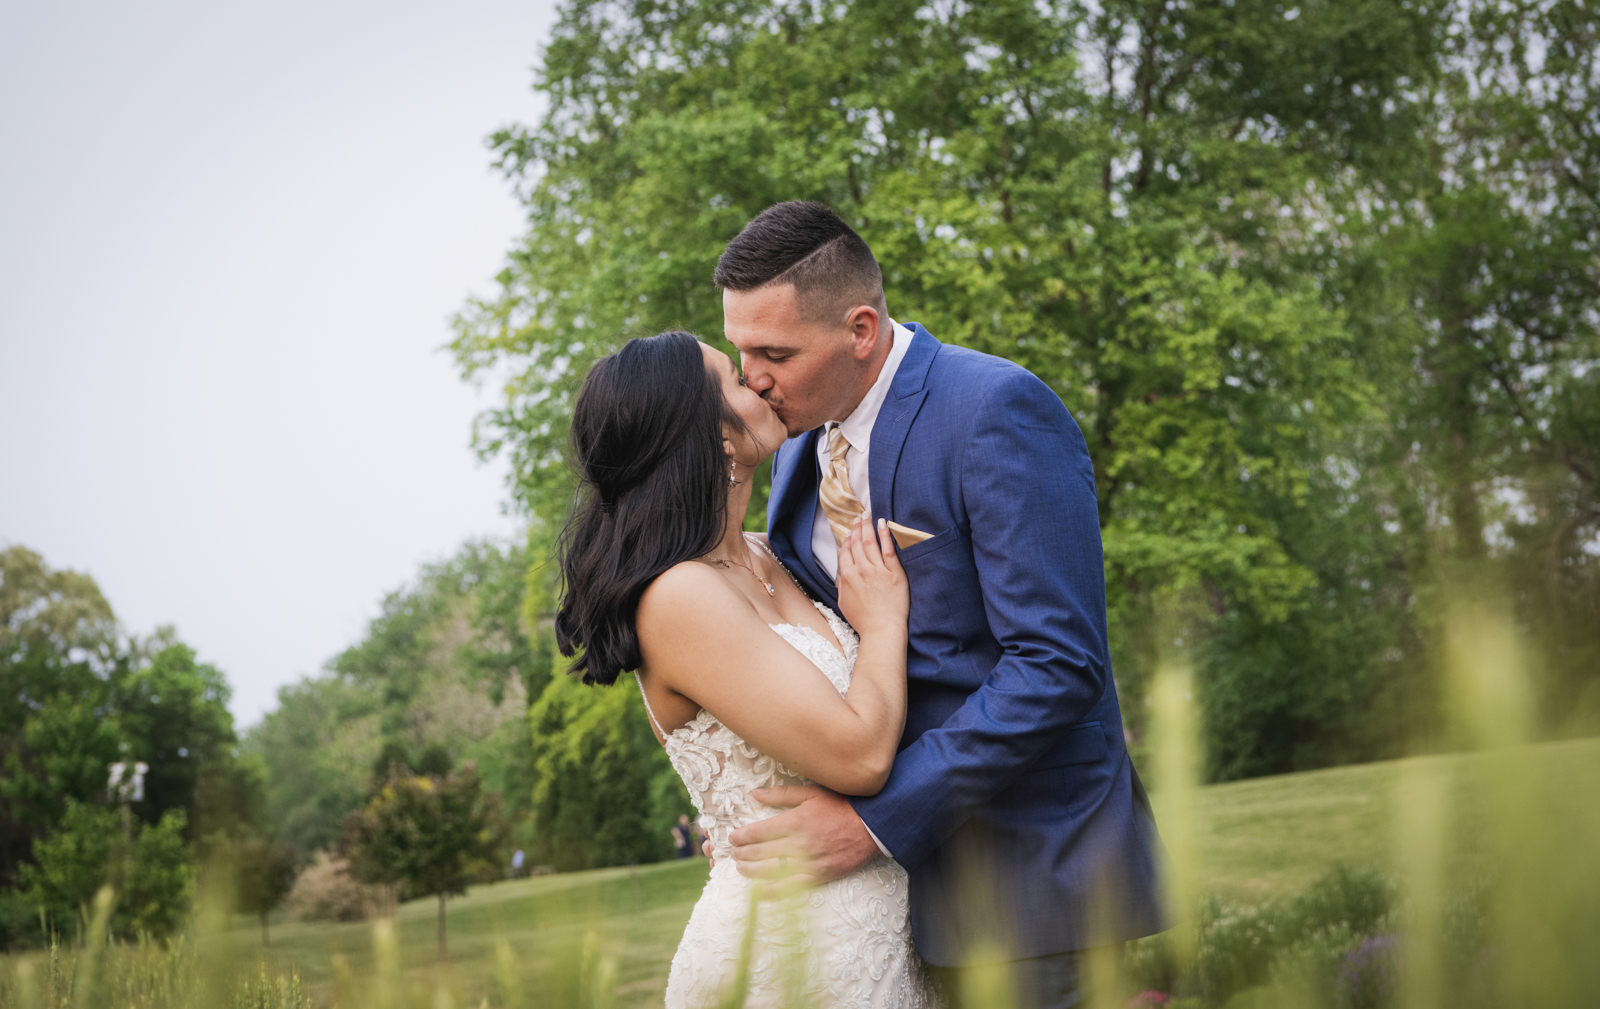 Love, Laughter, and Picture-Perfect Moments: A Glimpse into Mr. and Mrs. Youngblood’s Wedding at Millsite Lodge!